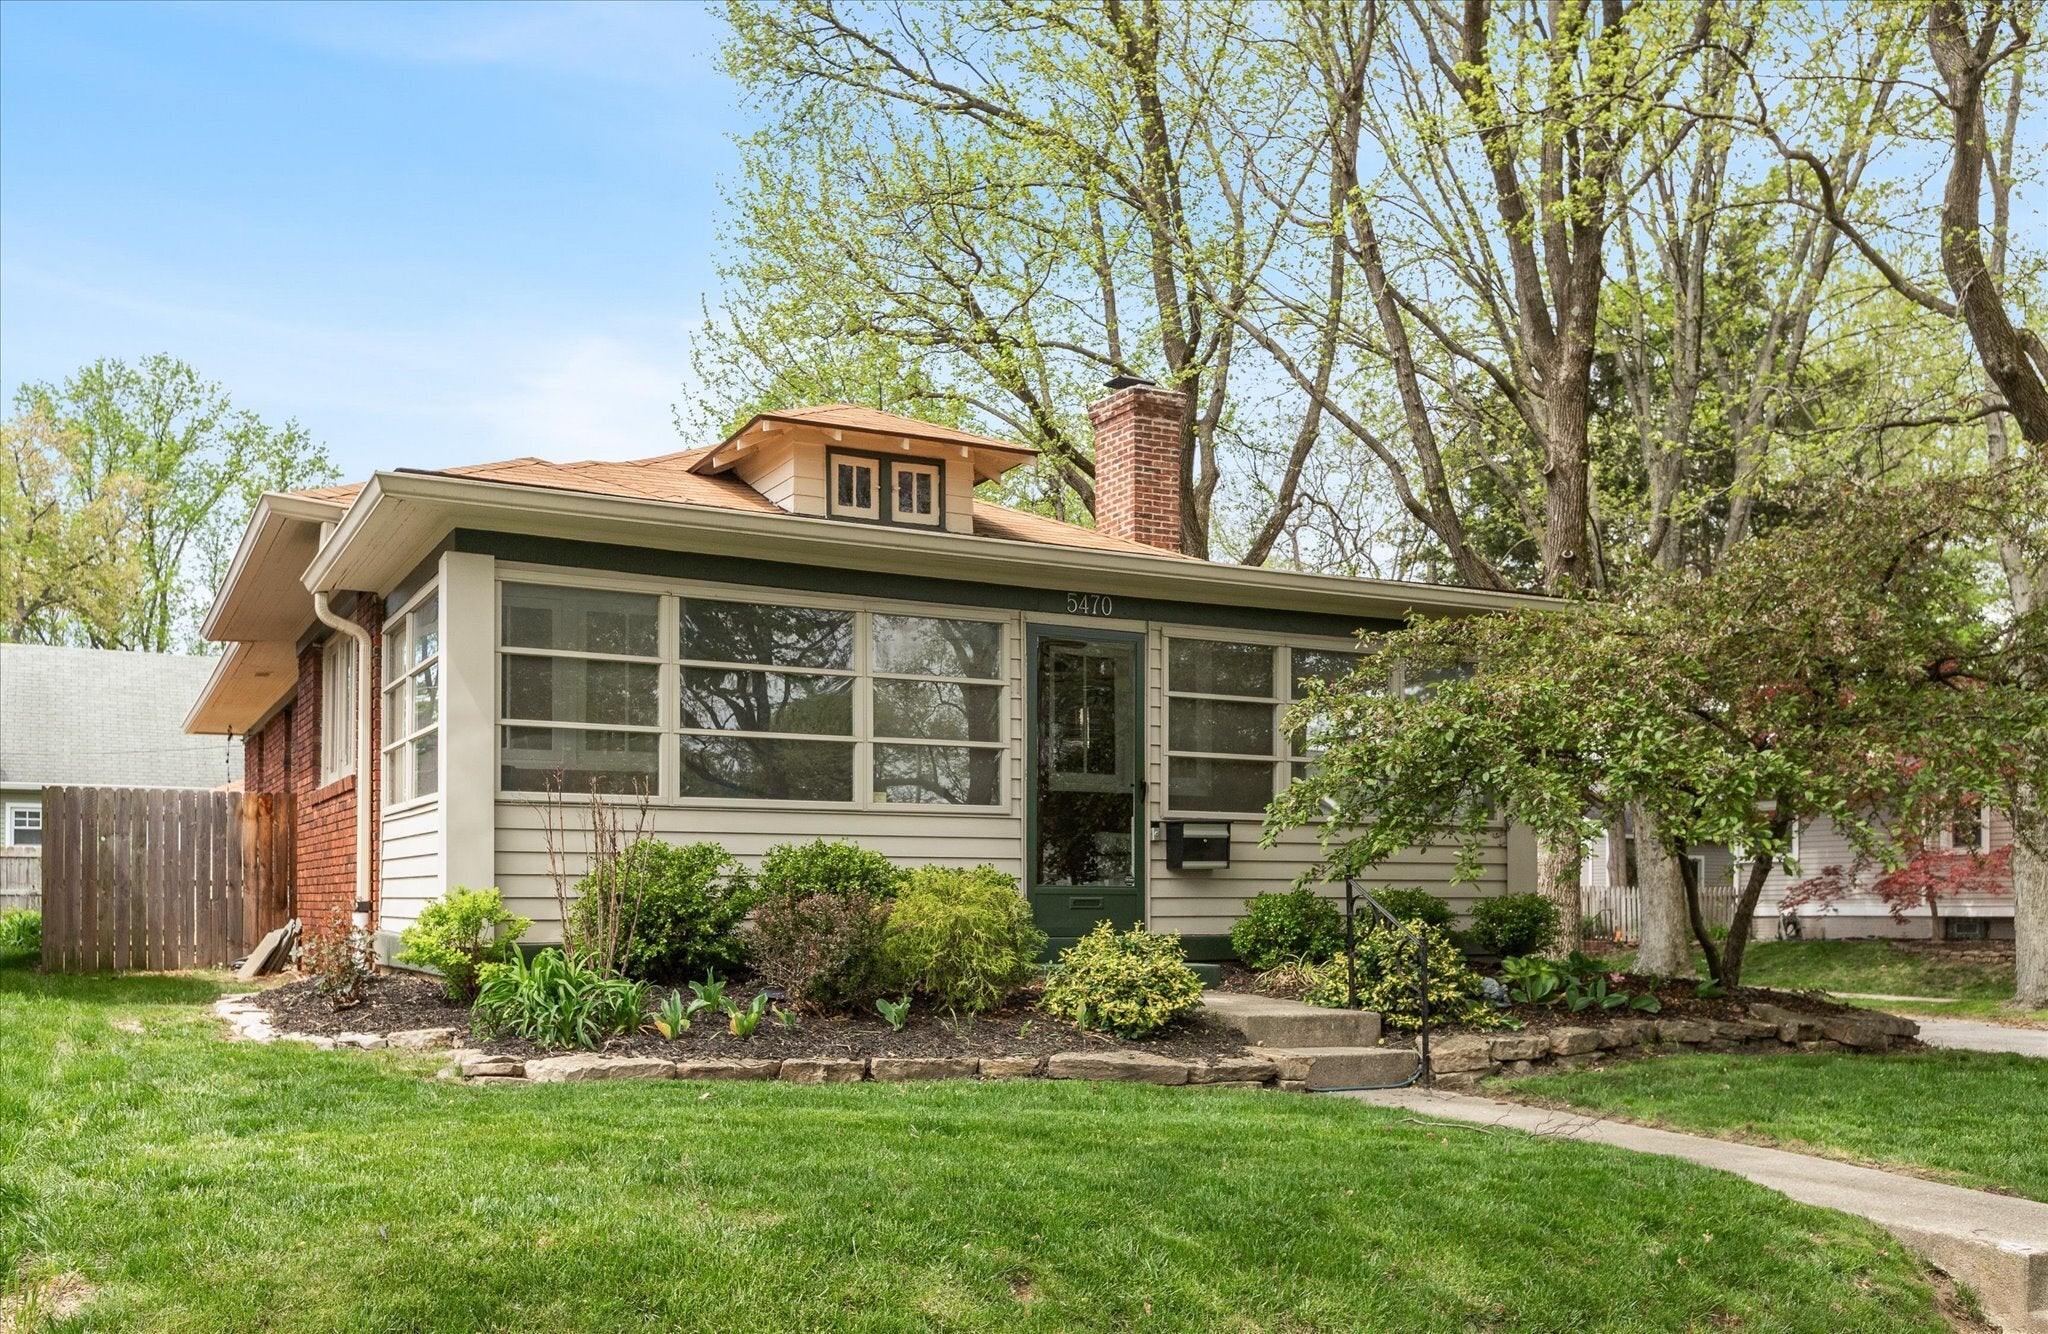 Photo of 5470 Guilford Avenue Indianapolis, IN 46220